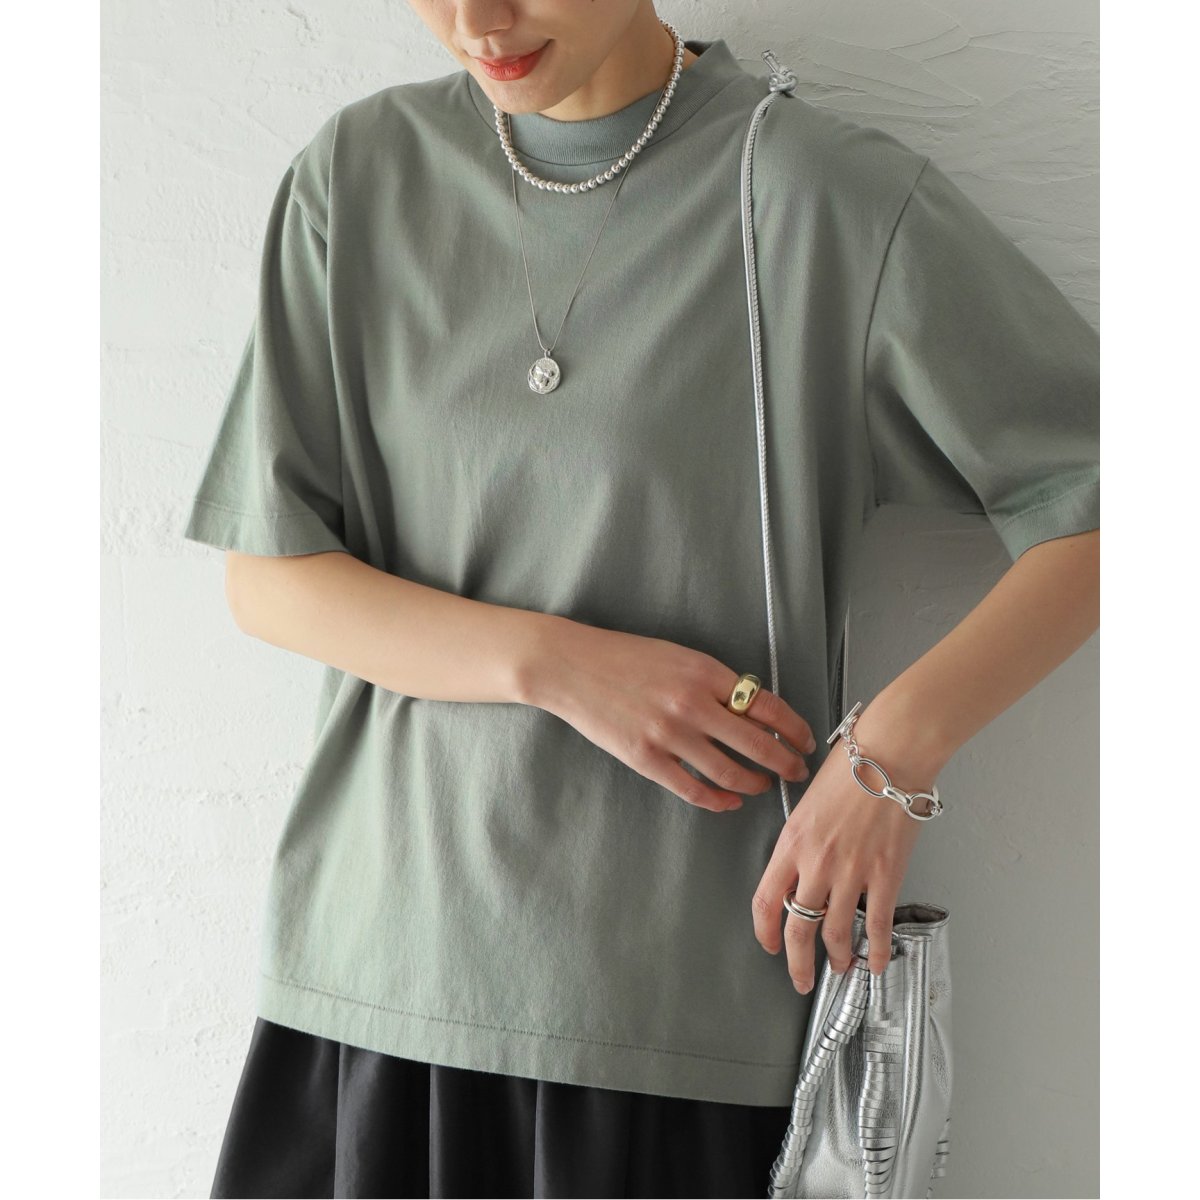 BLURHMS / ブラームス】 ROOTSTOCK EXTRA SOFT TEE STANDAR：Tシャツ 